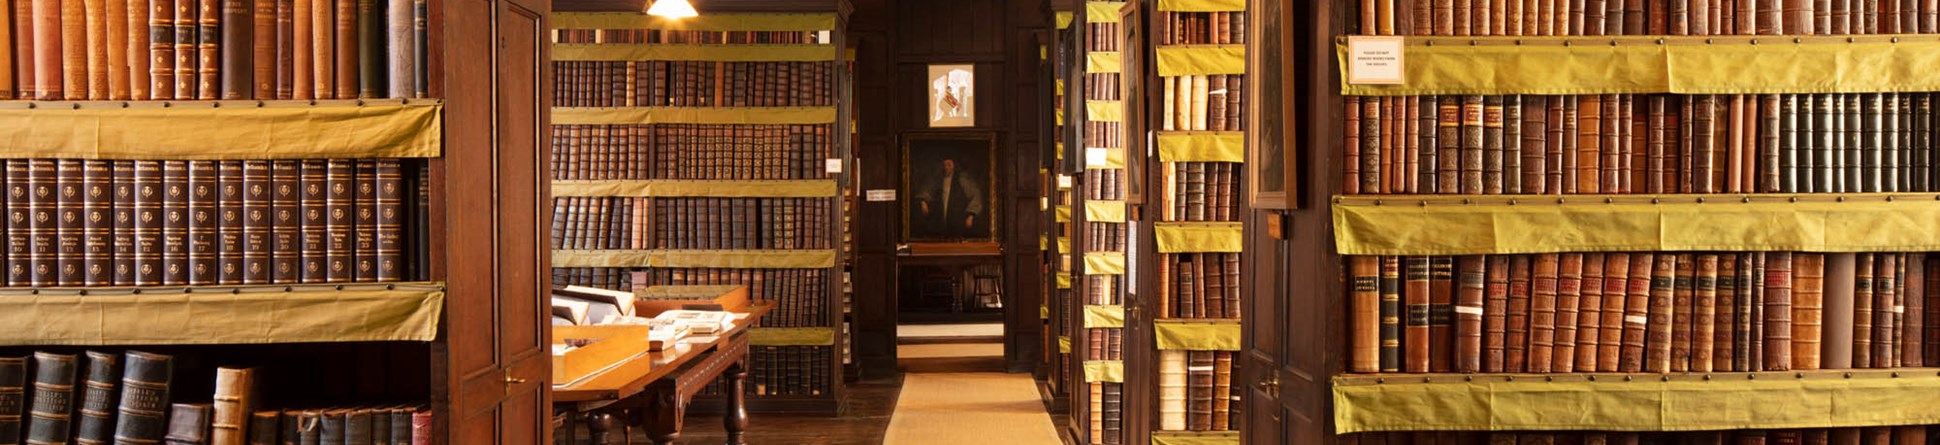 rows of dark wood historic bookcases line the Plume Library, filled with classic leatherbound books against a wooden timbered flooring lightened by a pale cream carpet runner.